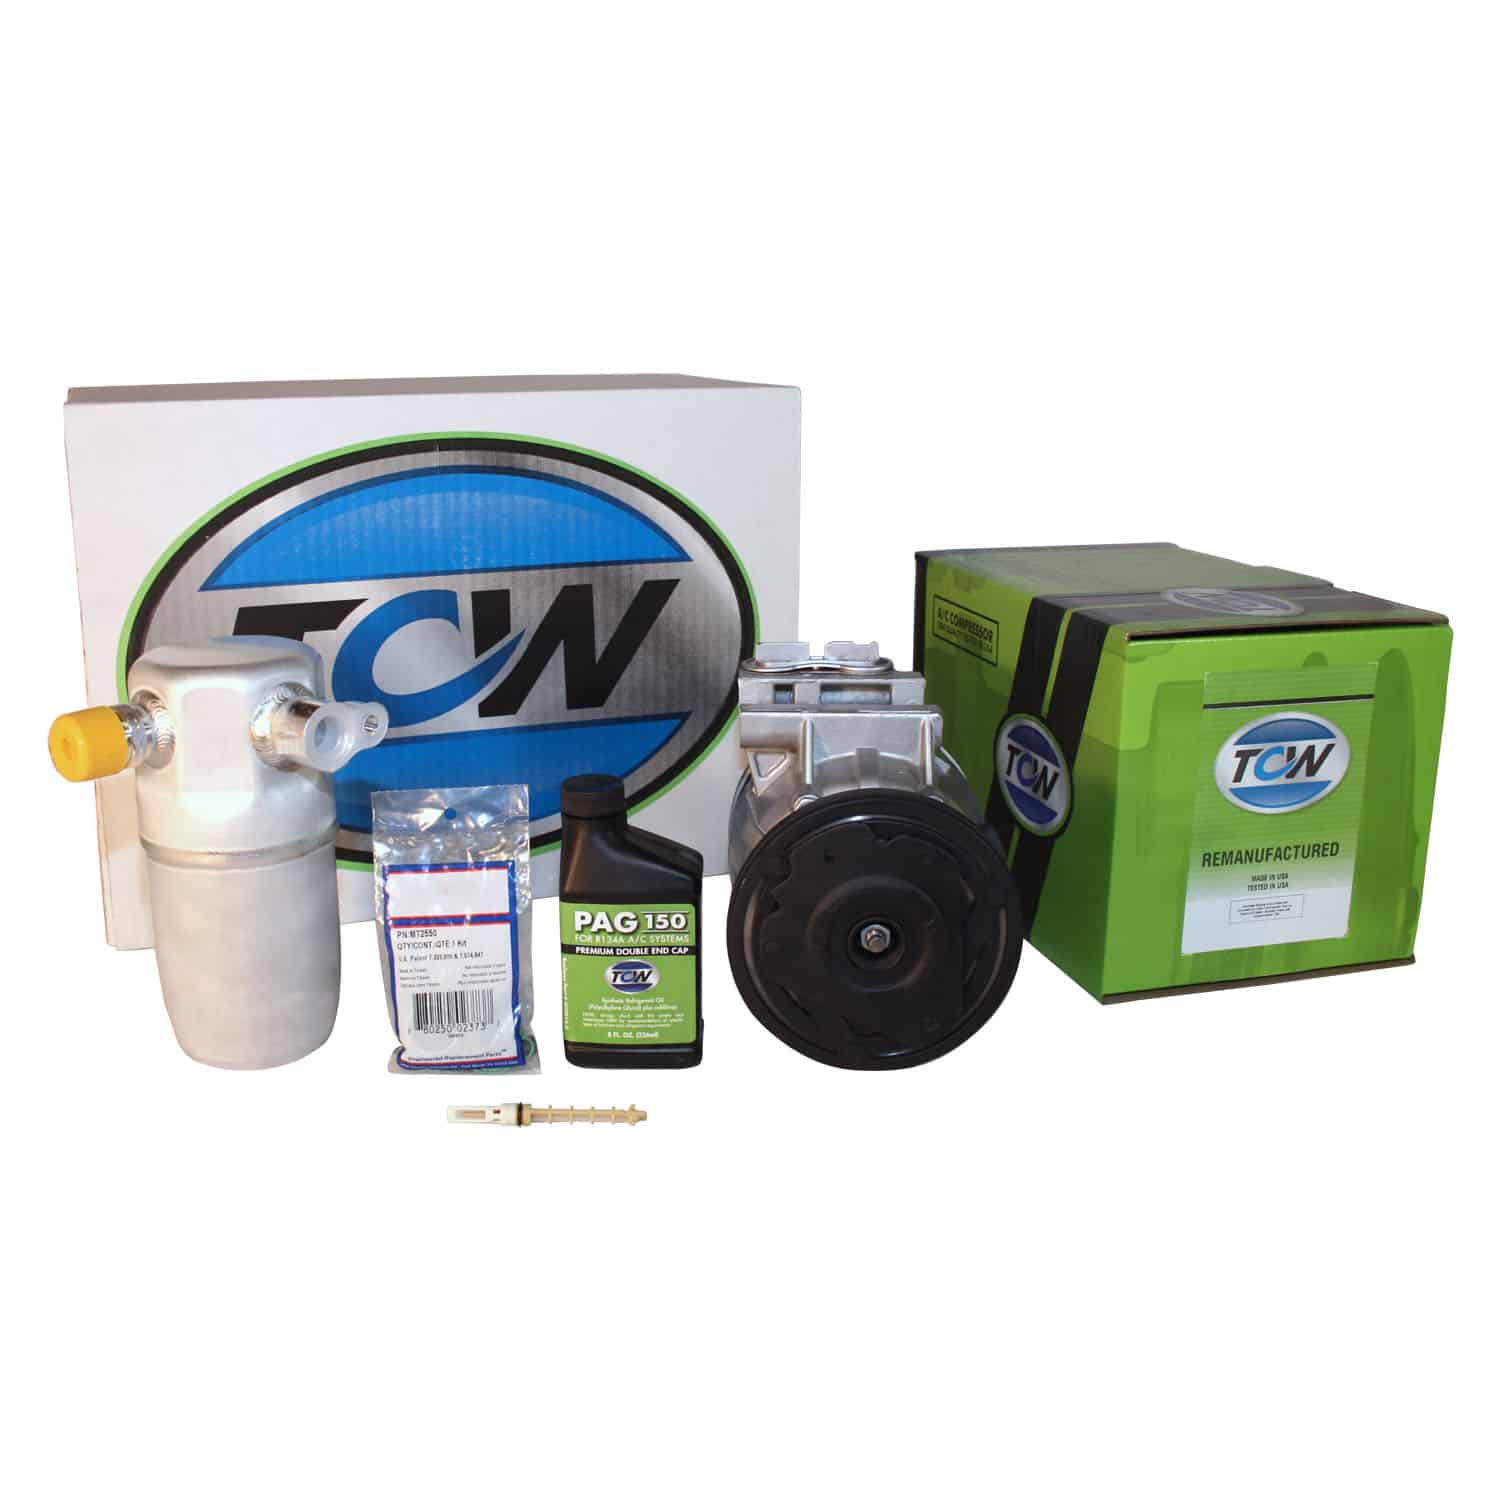 TCW Vehicle A/C Kit K1000365R Remanufactured Product Image field_60b6a13a6e67c